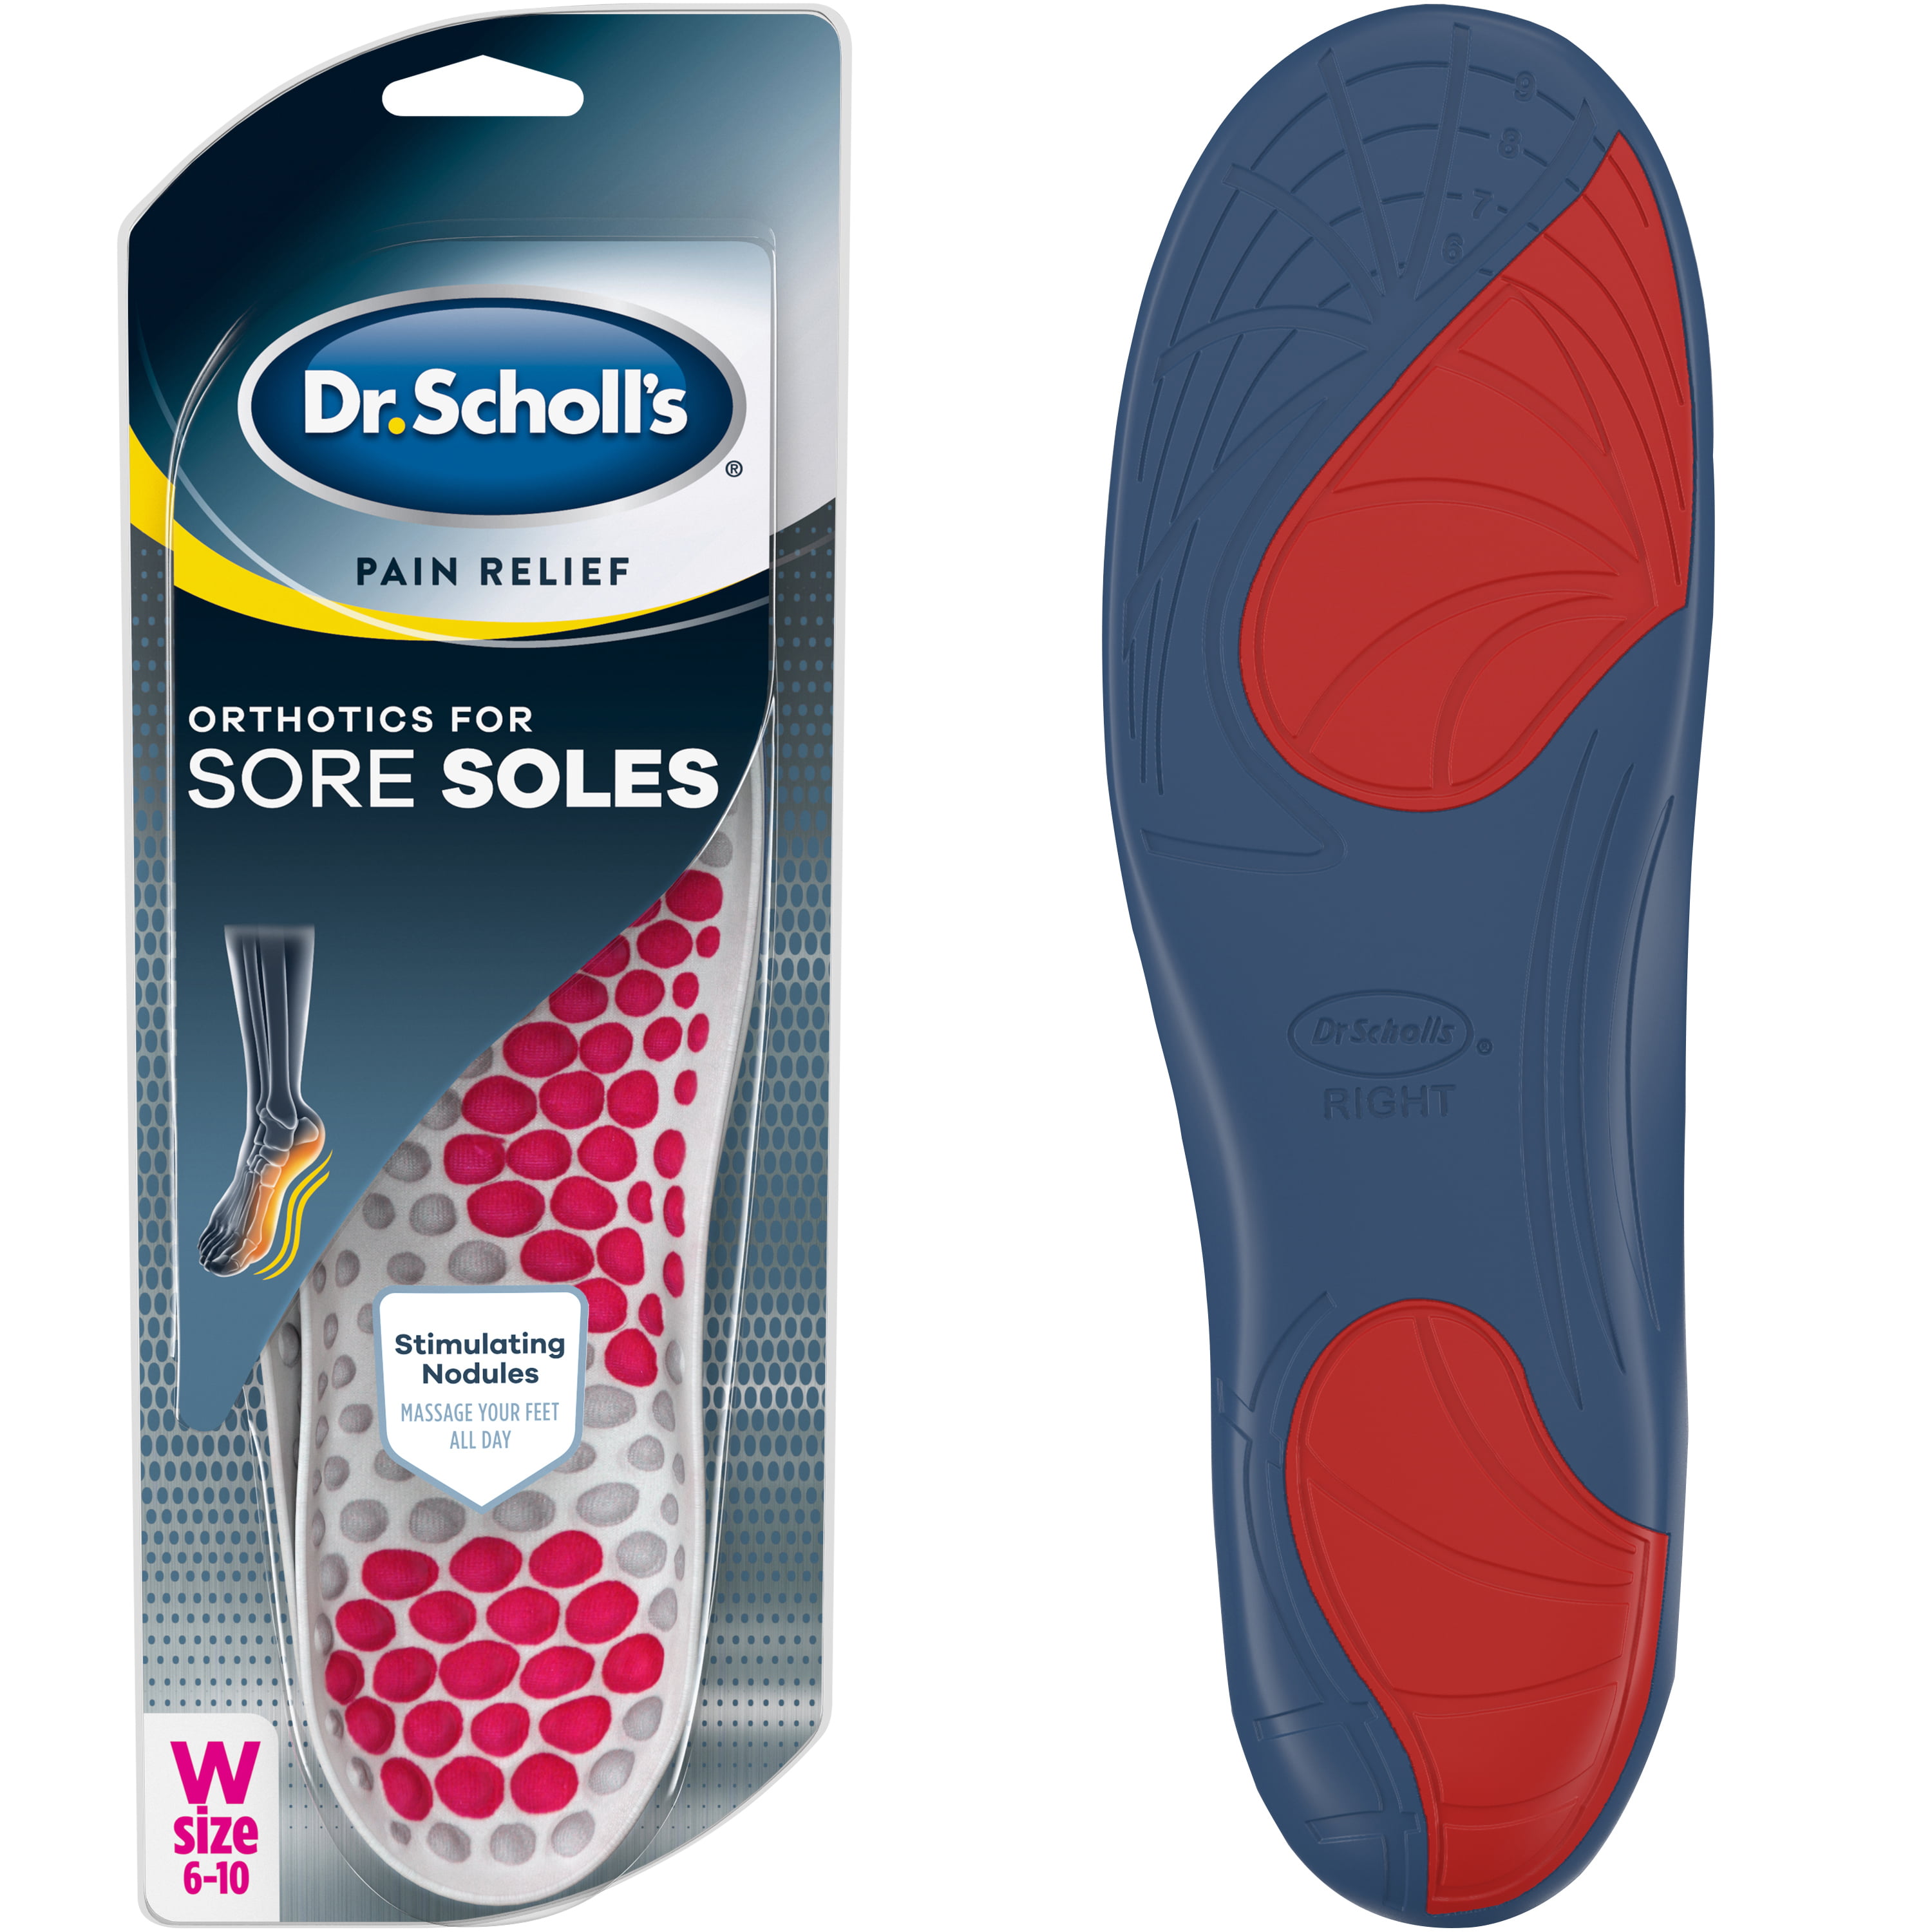 Dr. Scholl's Sore Soles Pain Relief Orthotic Inserts for Women (610